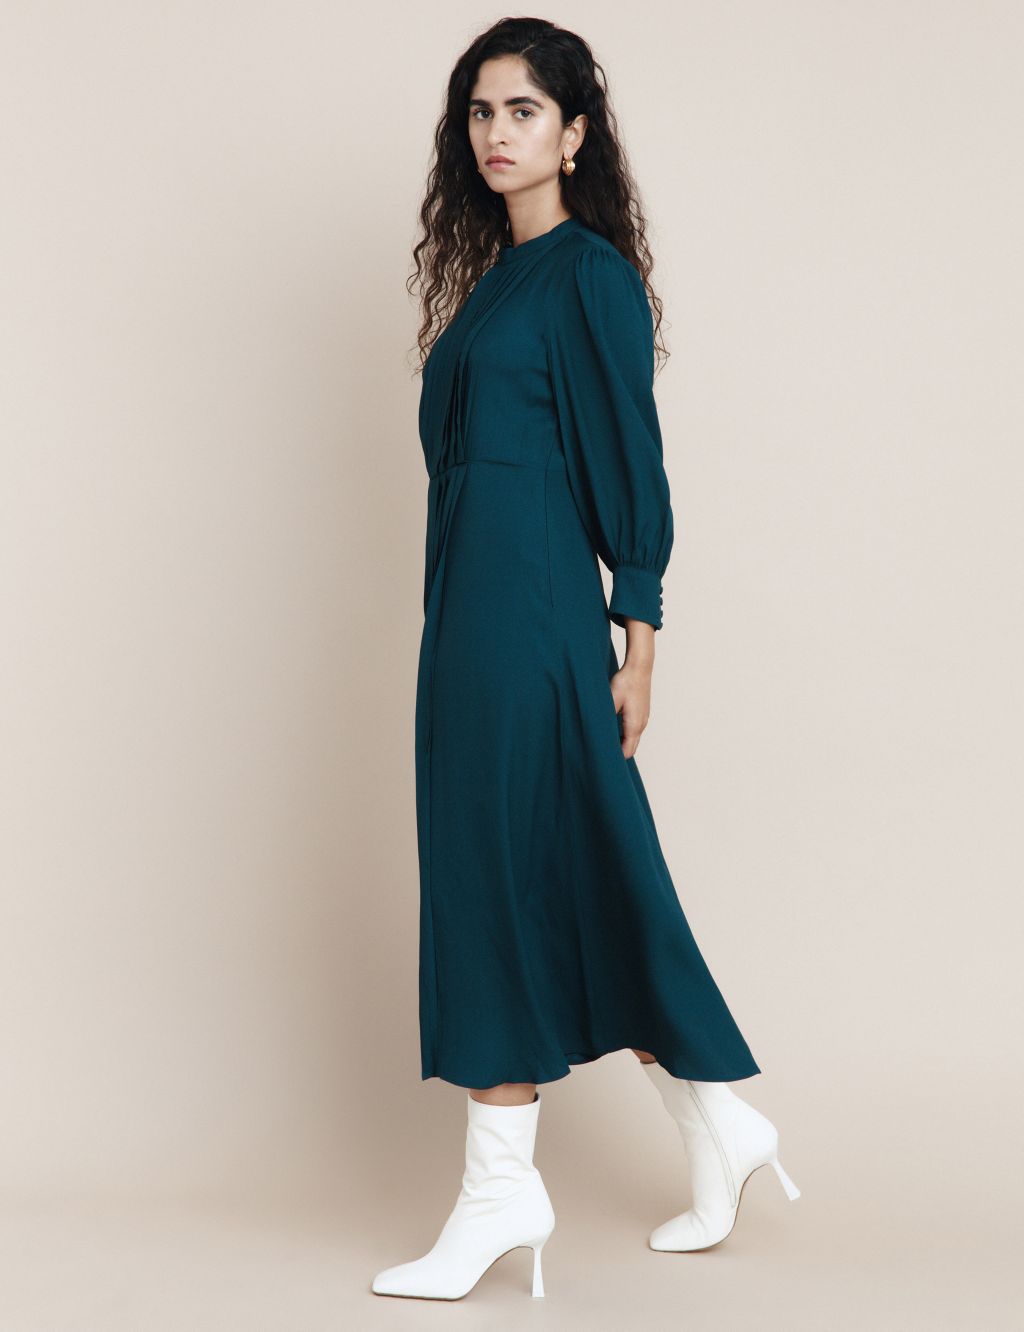 Crepe High Neck Pleated Midaxi Swing Dress image 2